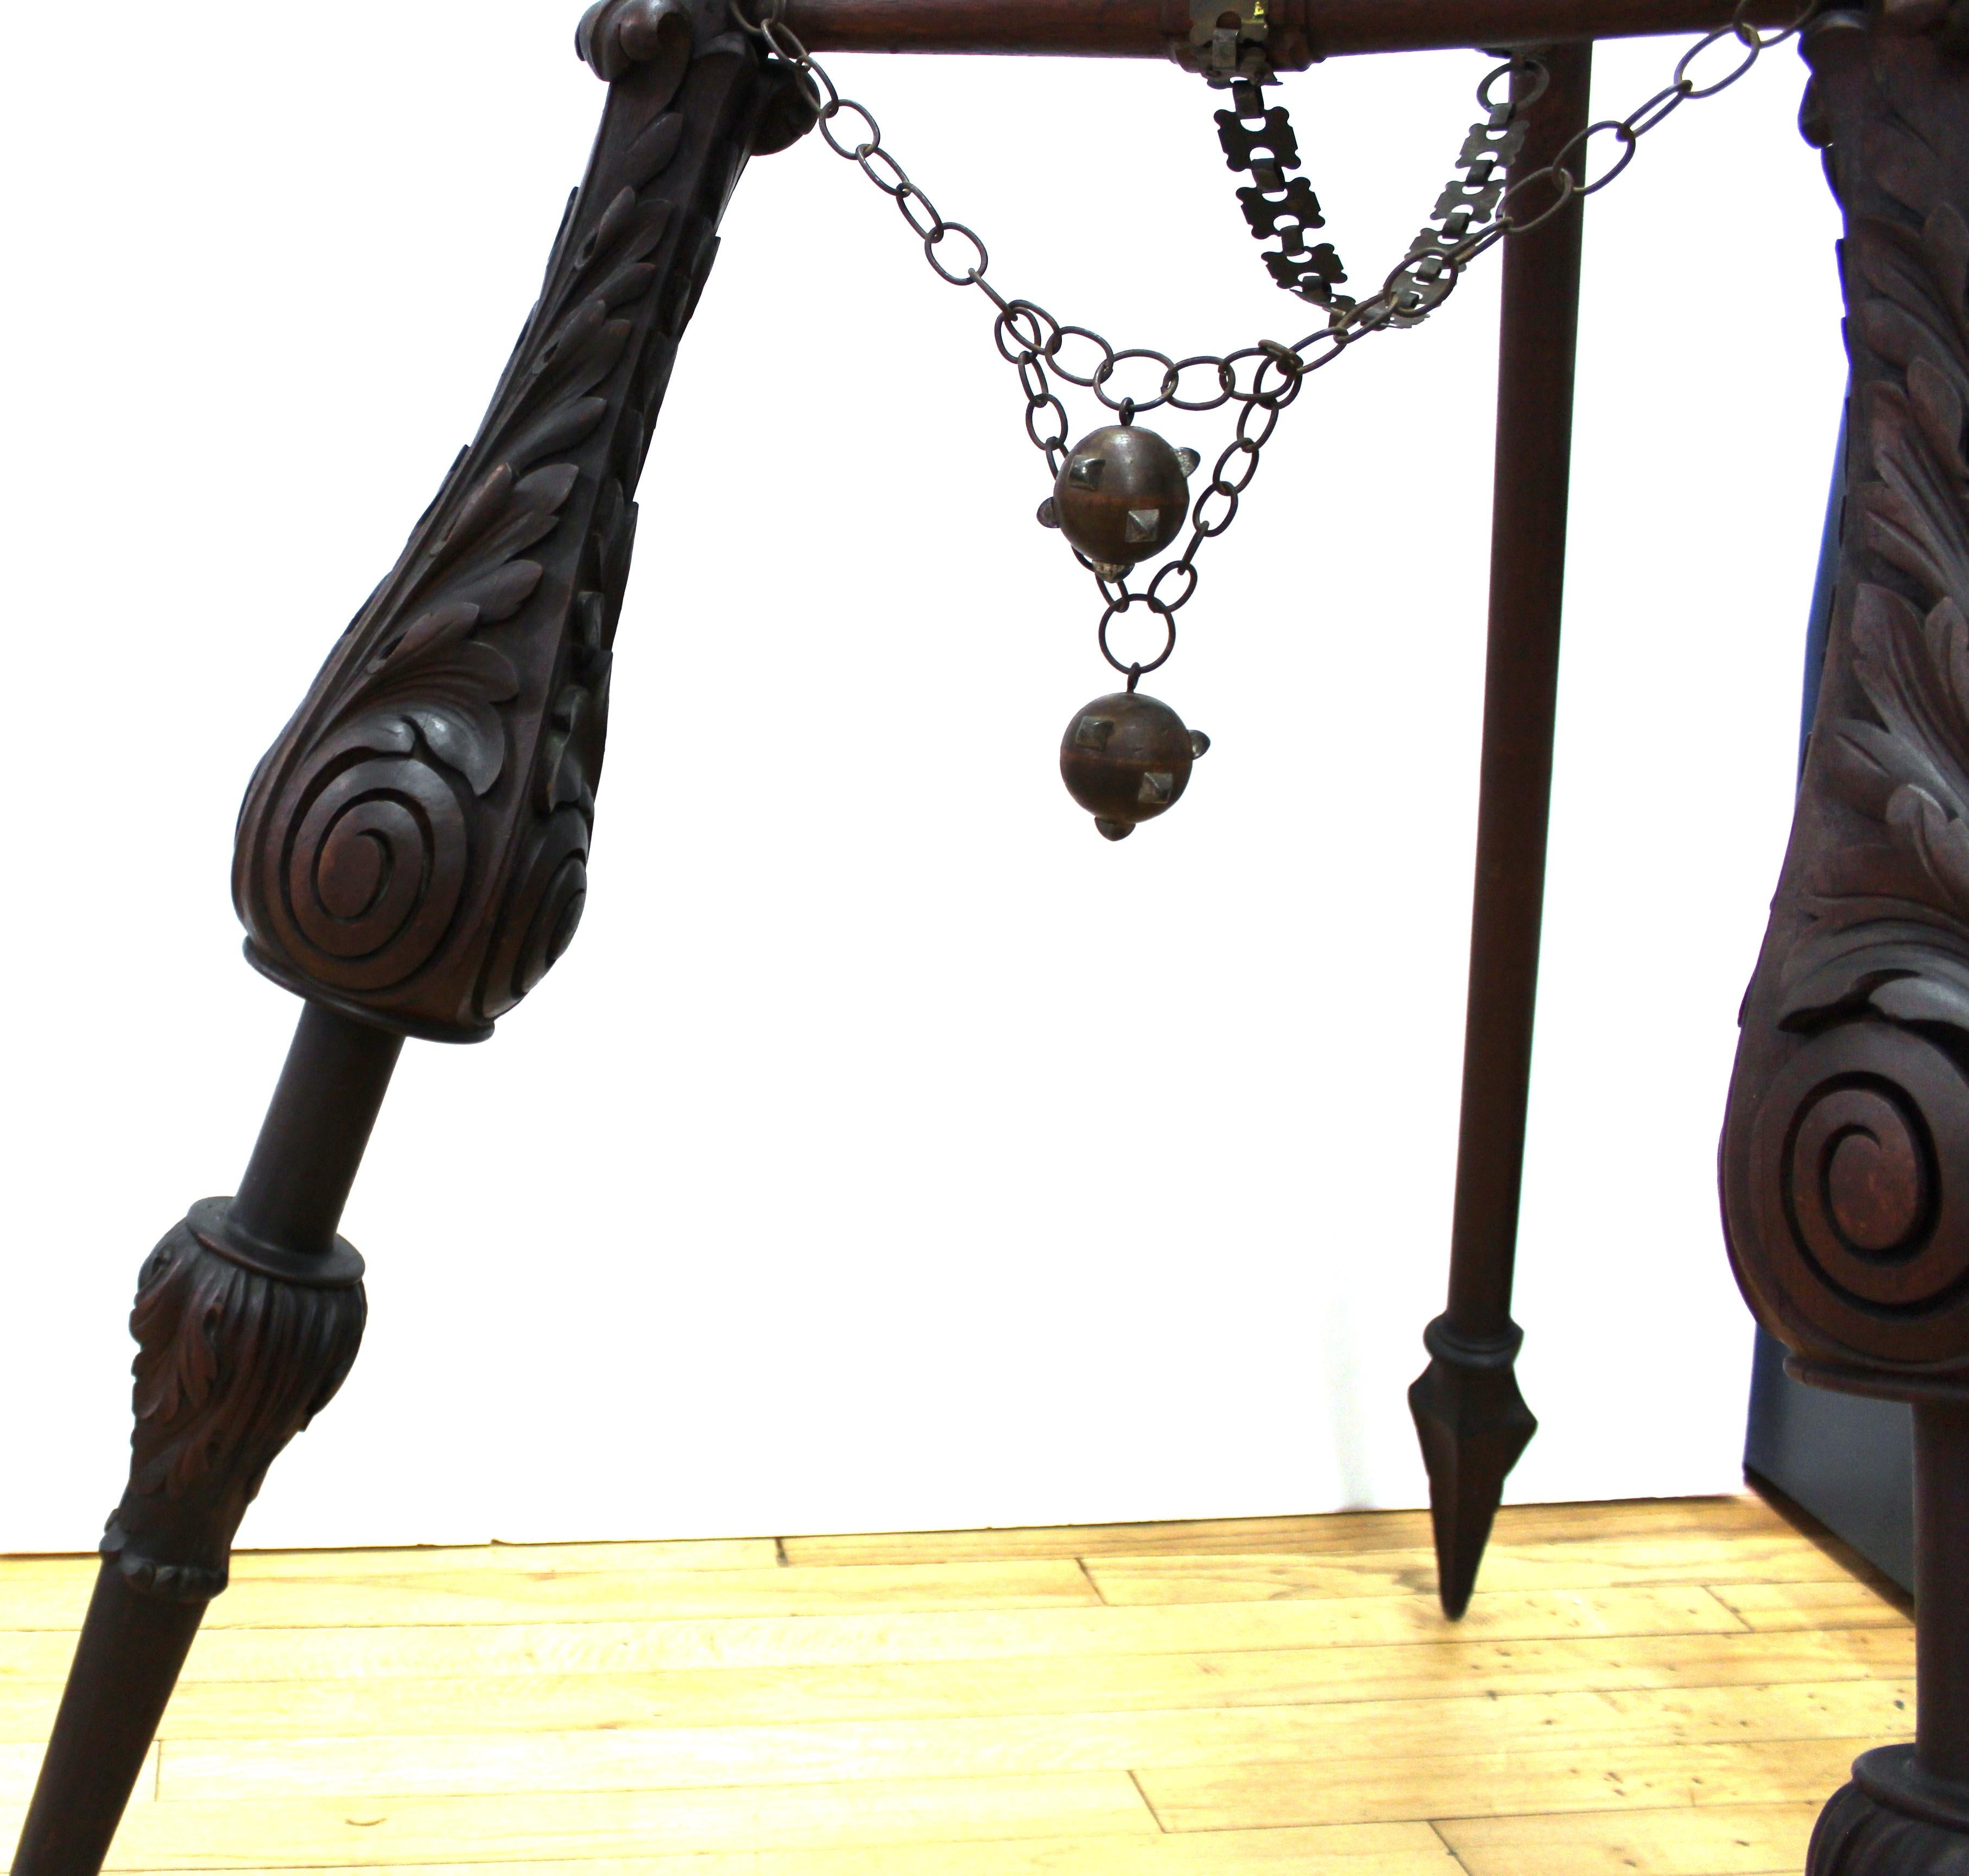 Italian Renaissance Revival Easel with Jousting Lances & Knight Helmet Finial For Sale 5